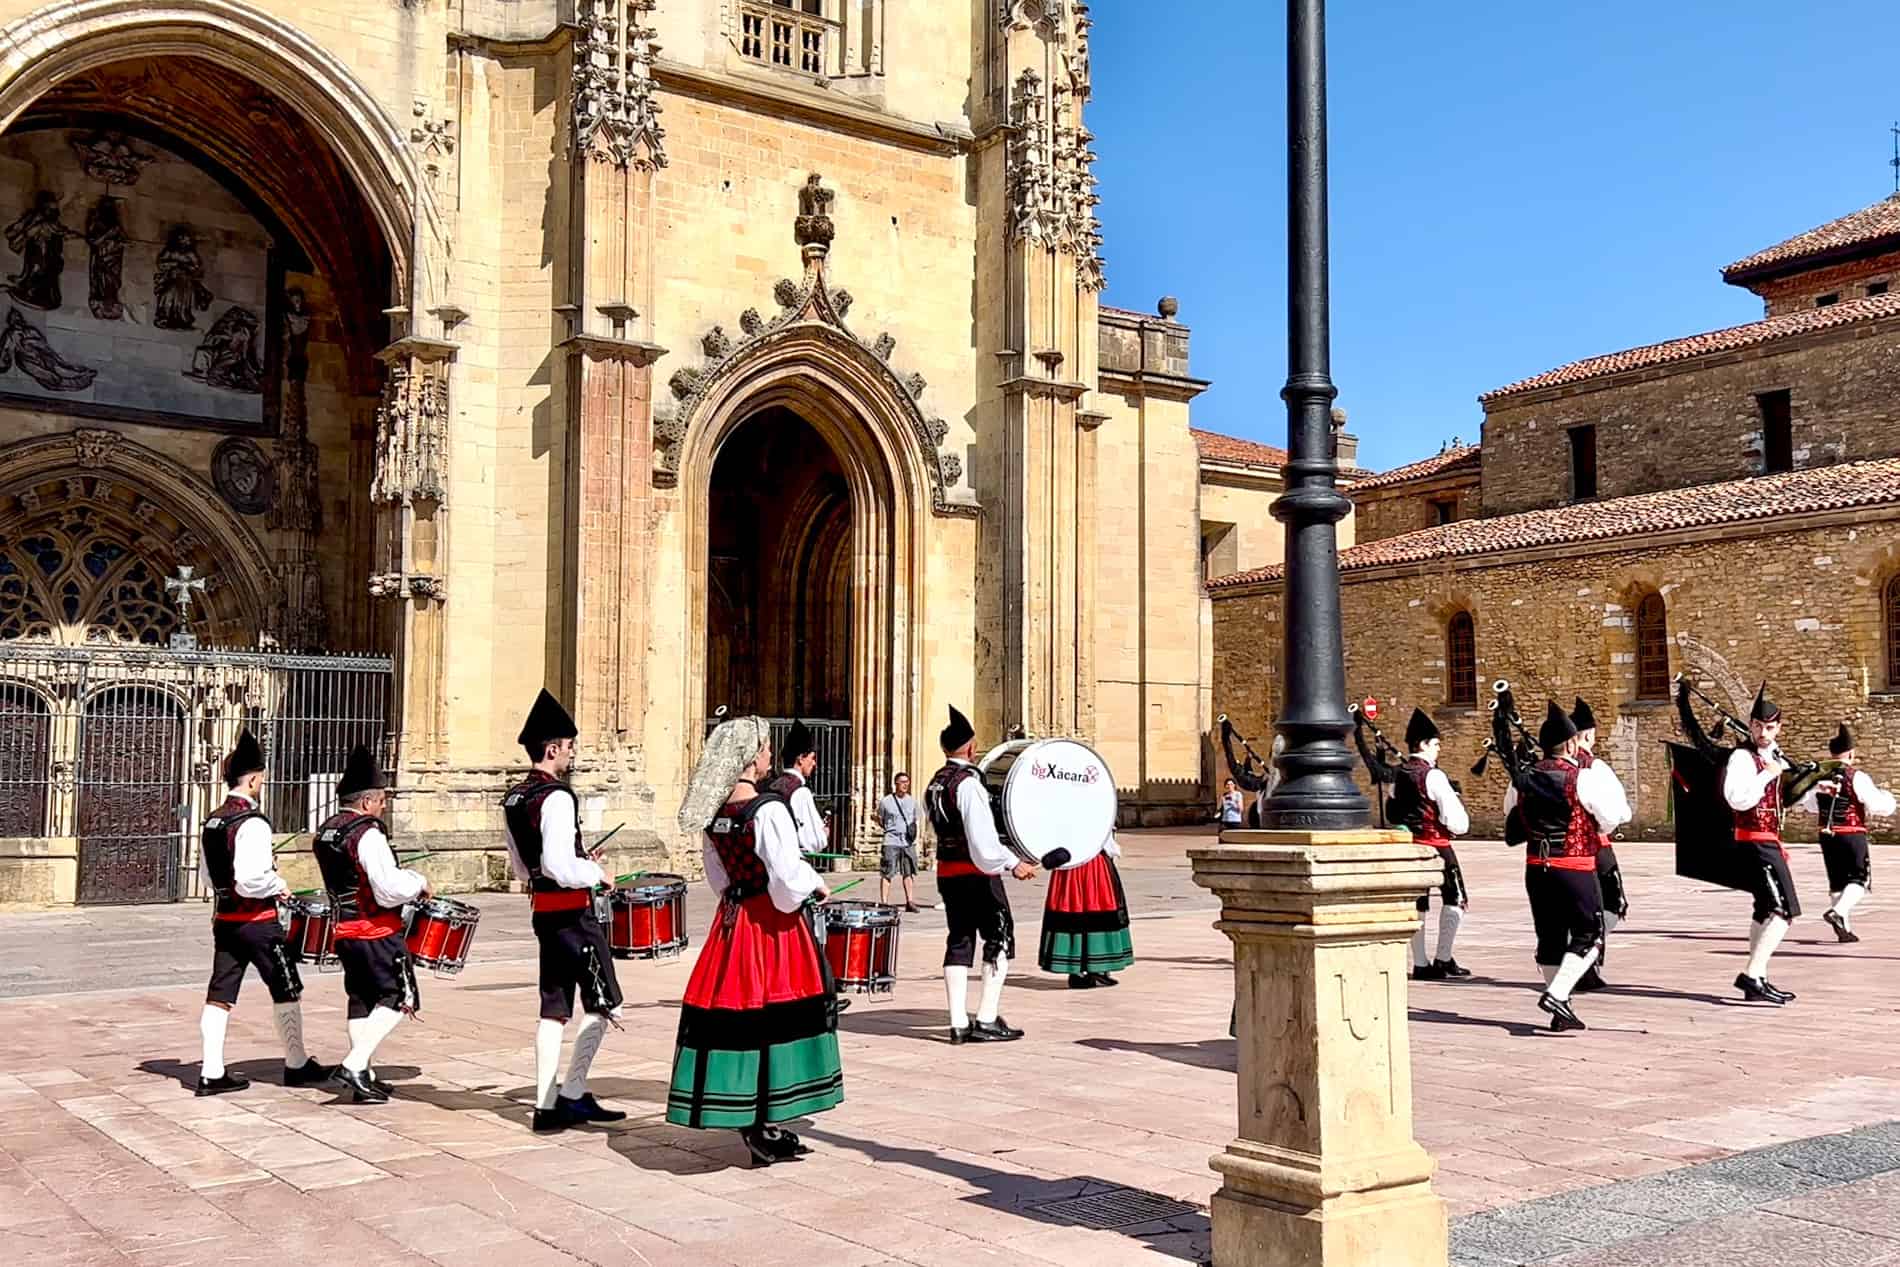 A band in black, white, red and green folk dress perform with drums and Gaita Asturiana bagpipes outside the cathedral in Oviedo, Spain.